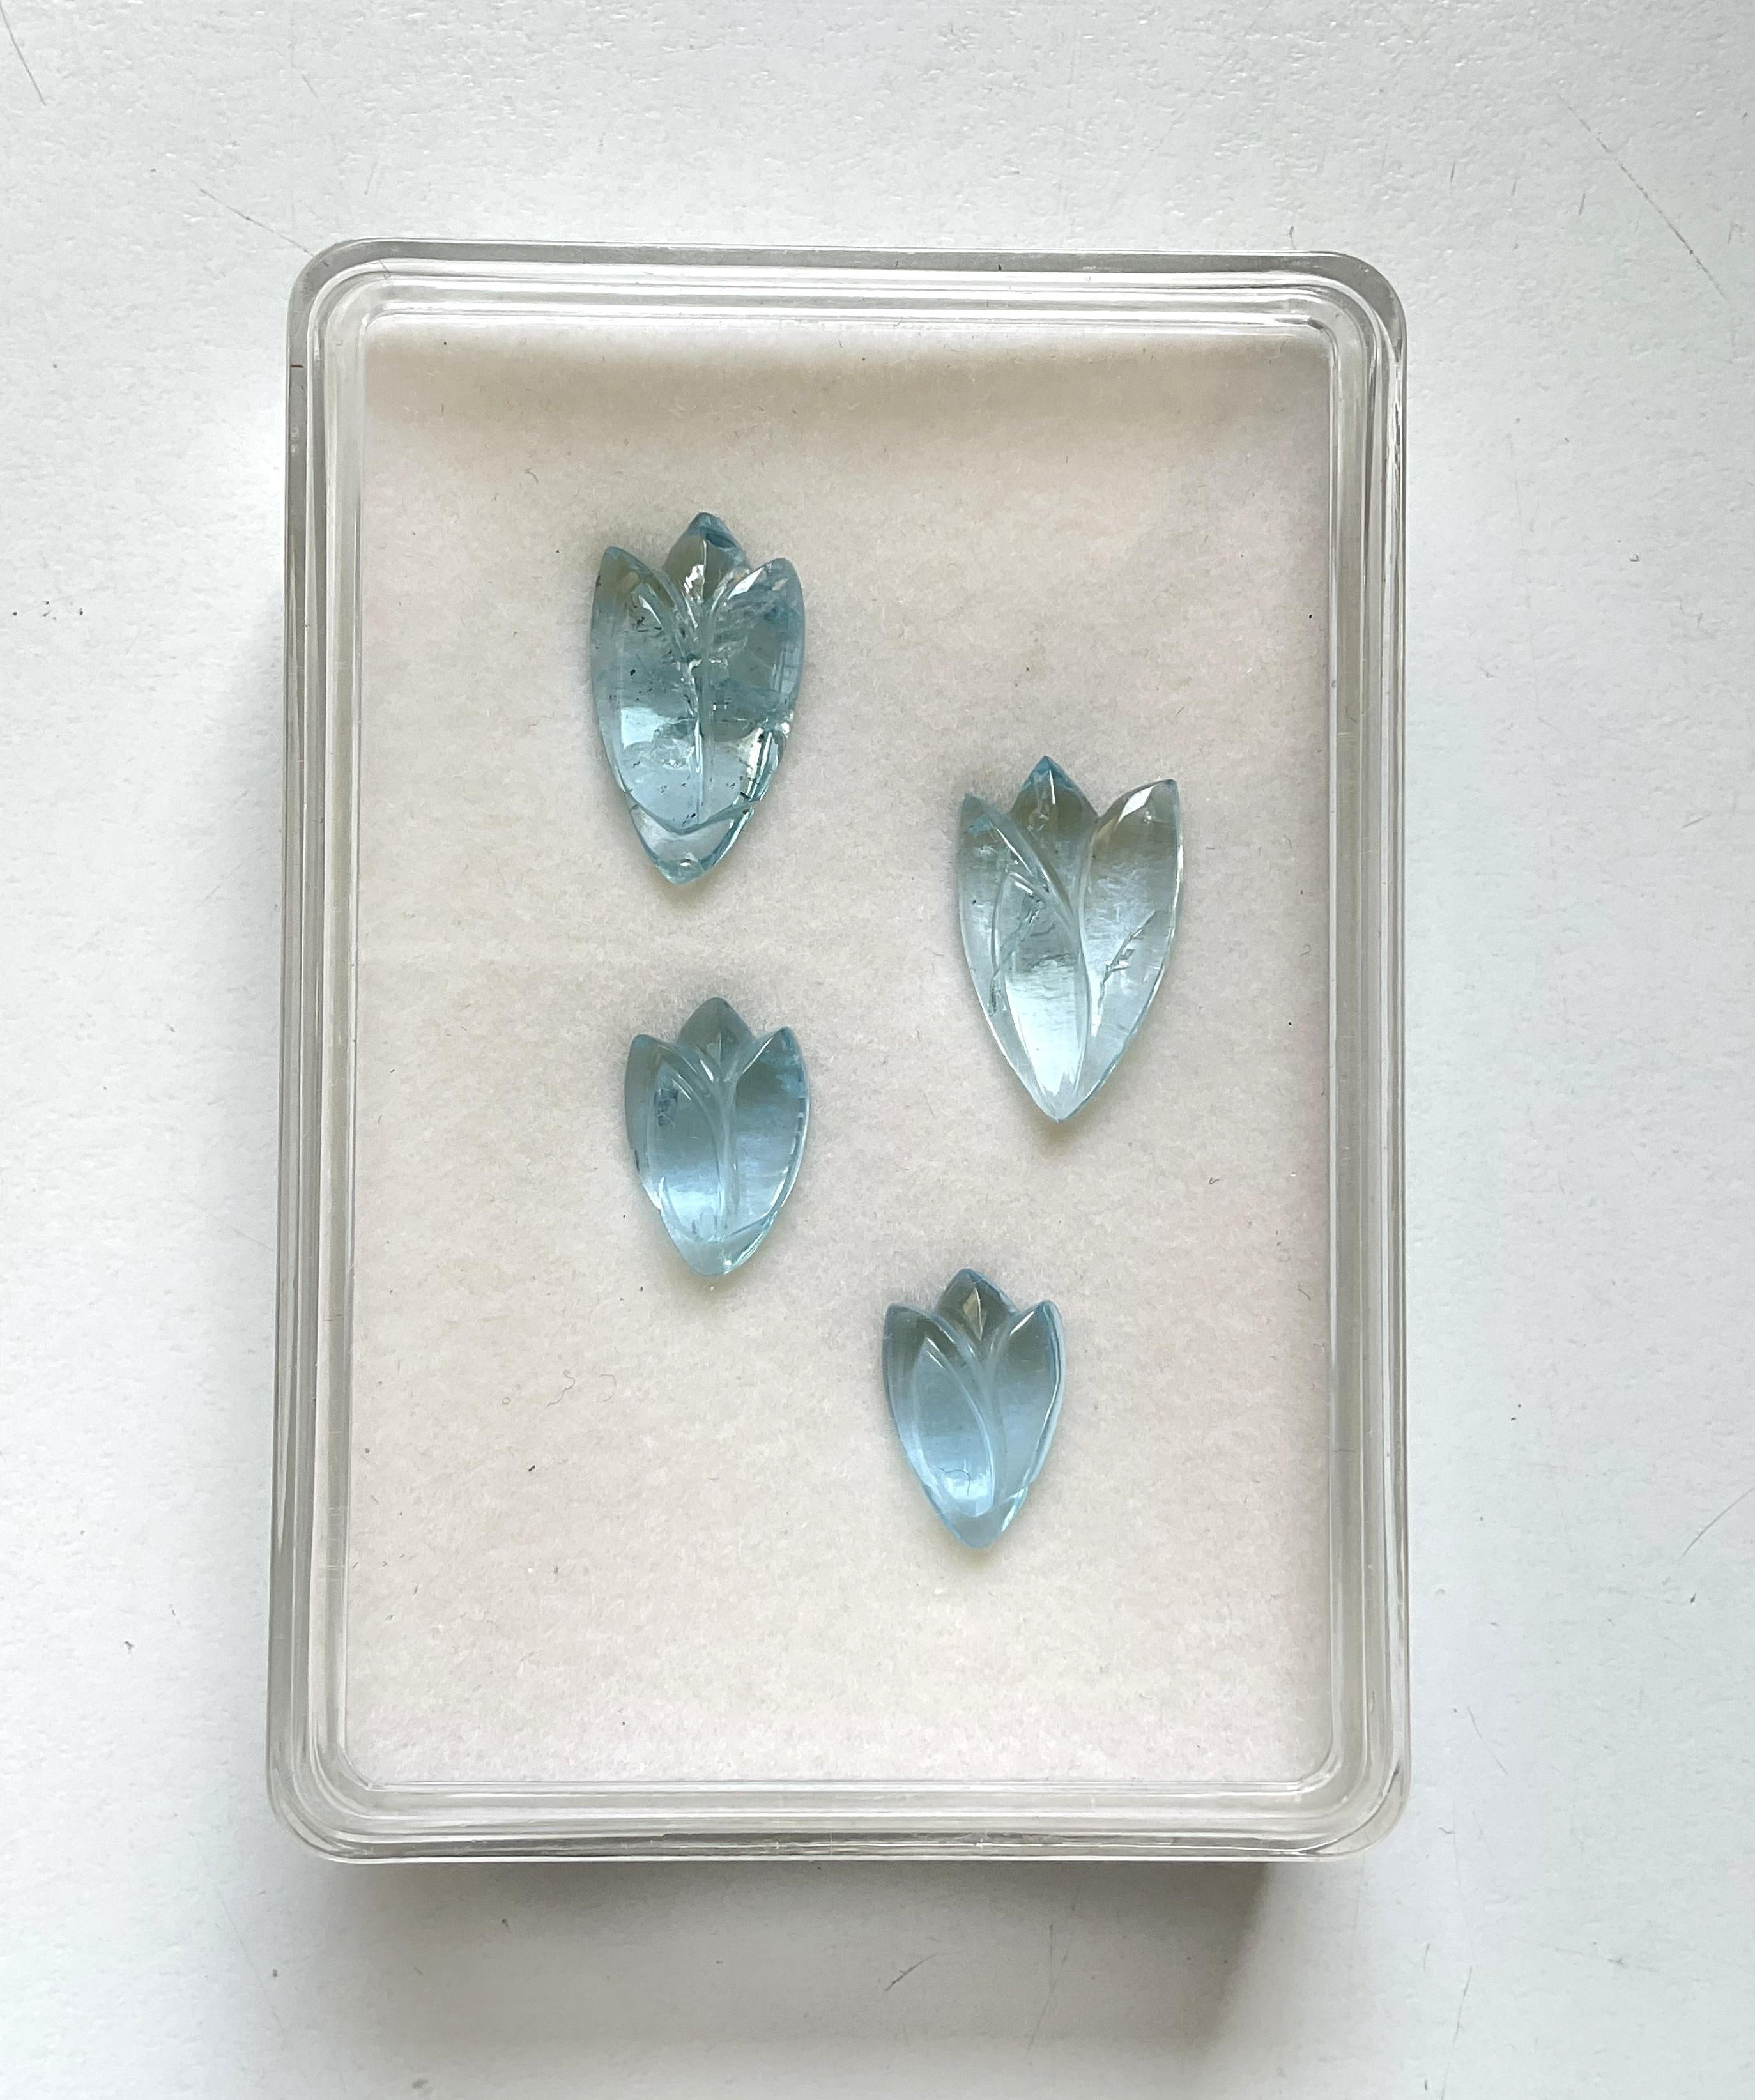 Shield Cut 28.71 carats aquamarine petal carving 4 pieces set for jewelry natural gemstone For Sale